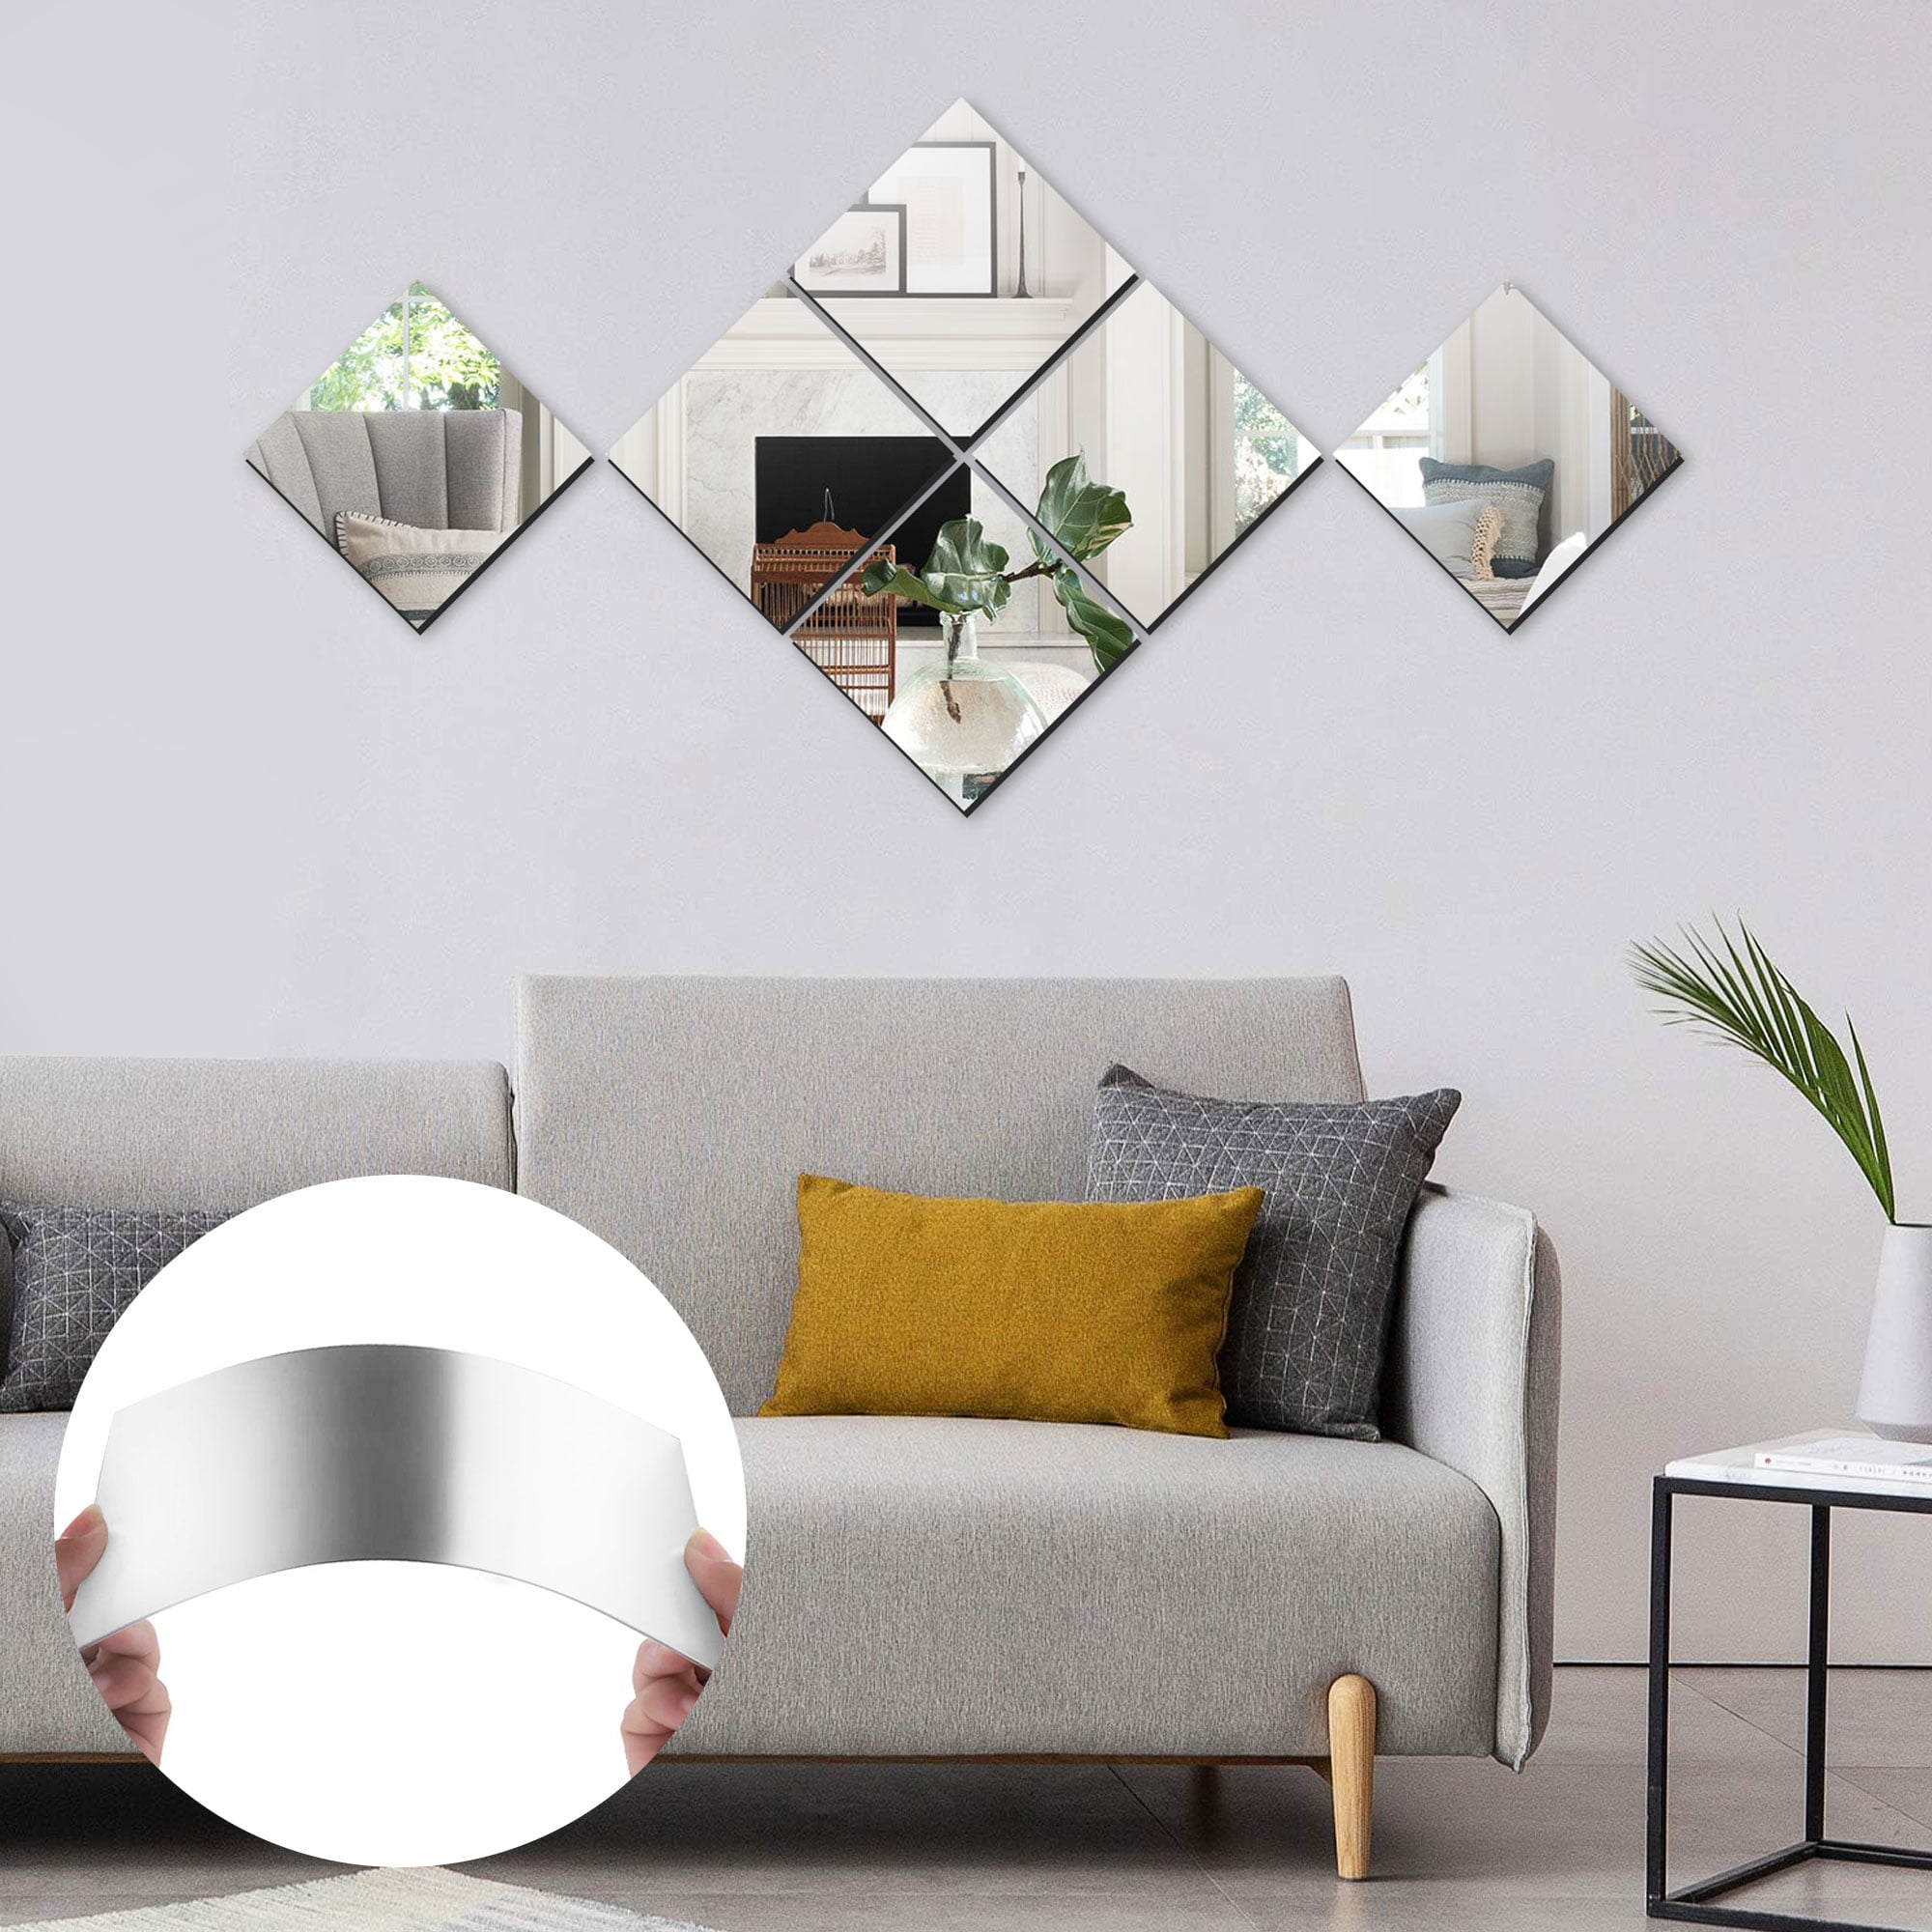 Mirror Self Adhesive Acrylic Tiles Flexible Cuttable Wall Stickers  Non-Glass Safety Reflective For DIY Craft Home Wall Decor - AliExpress